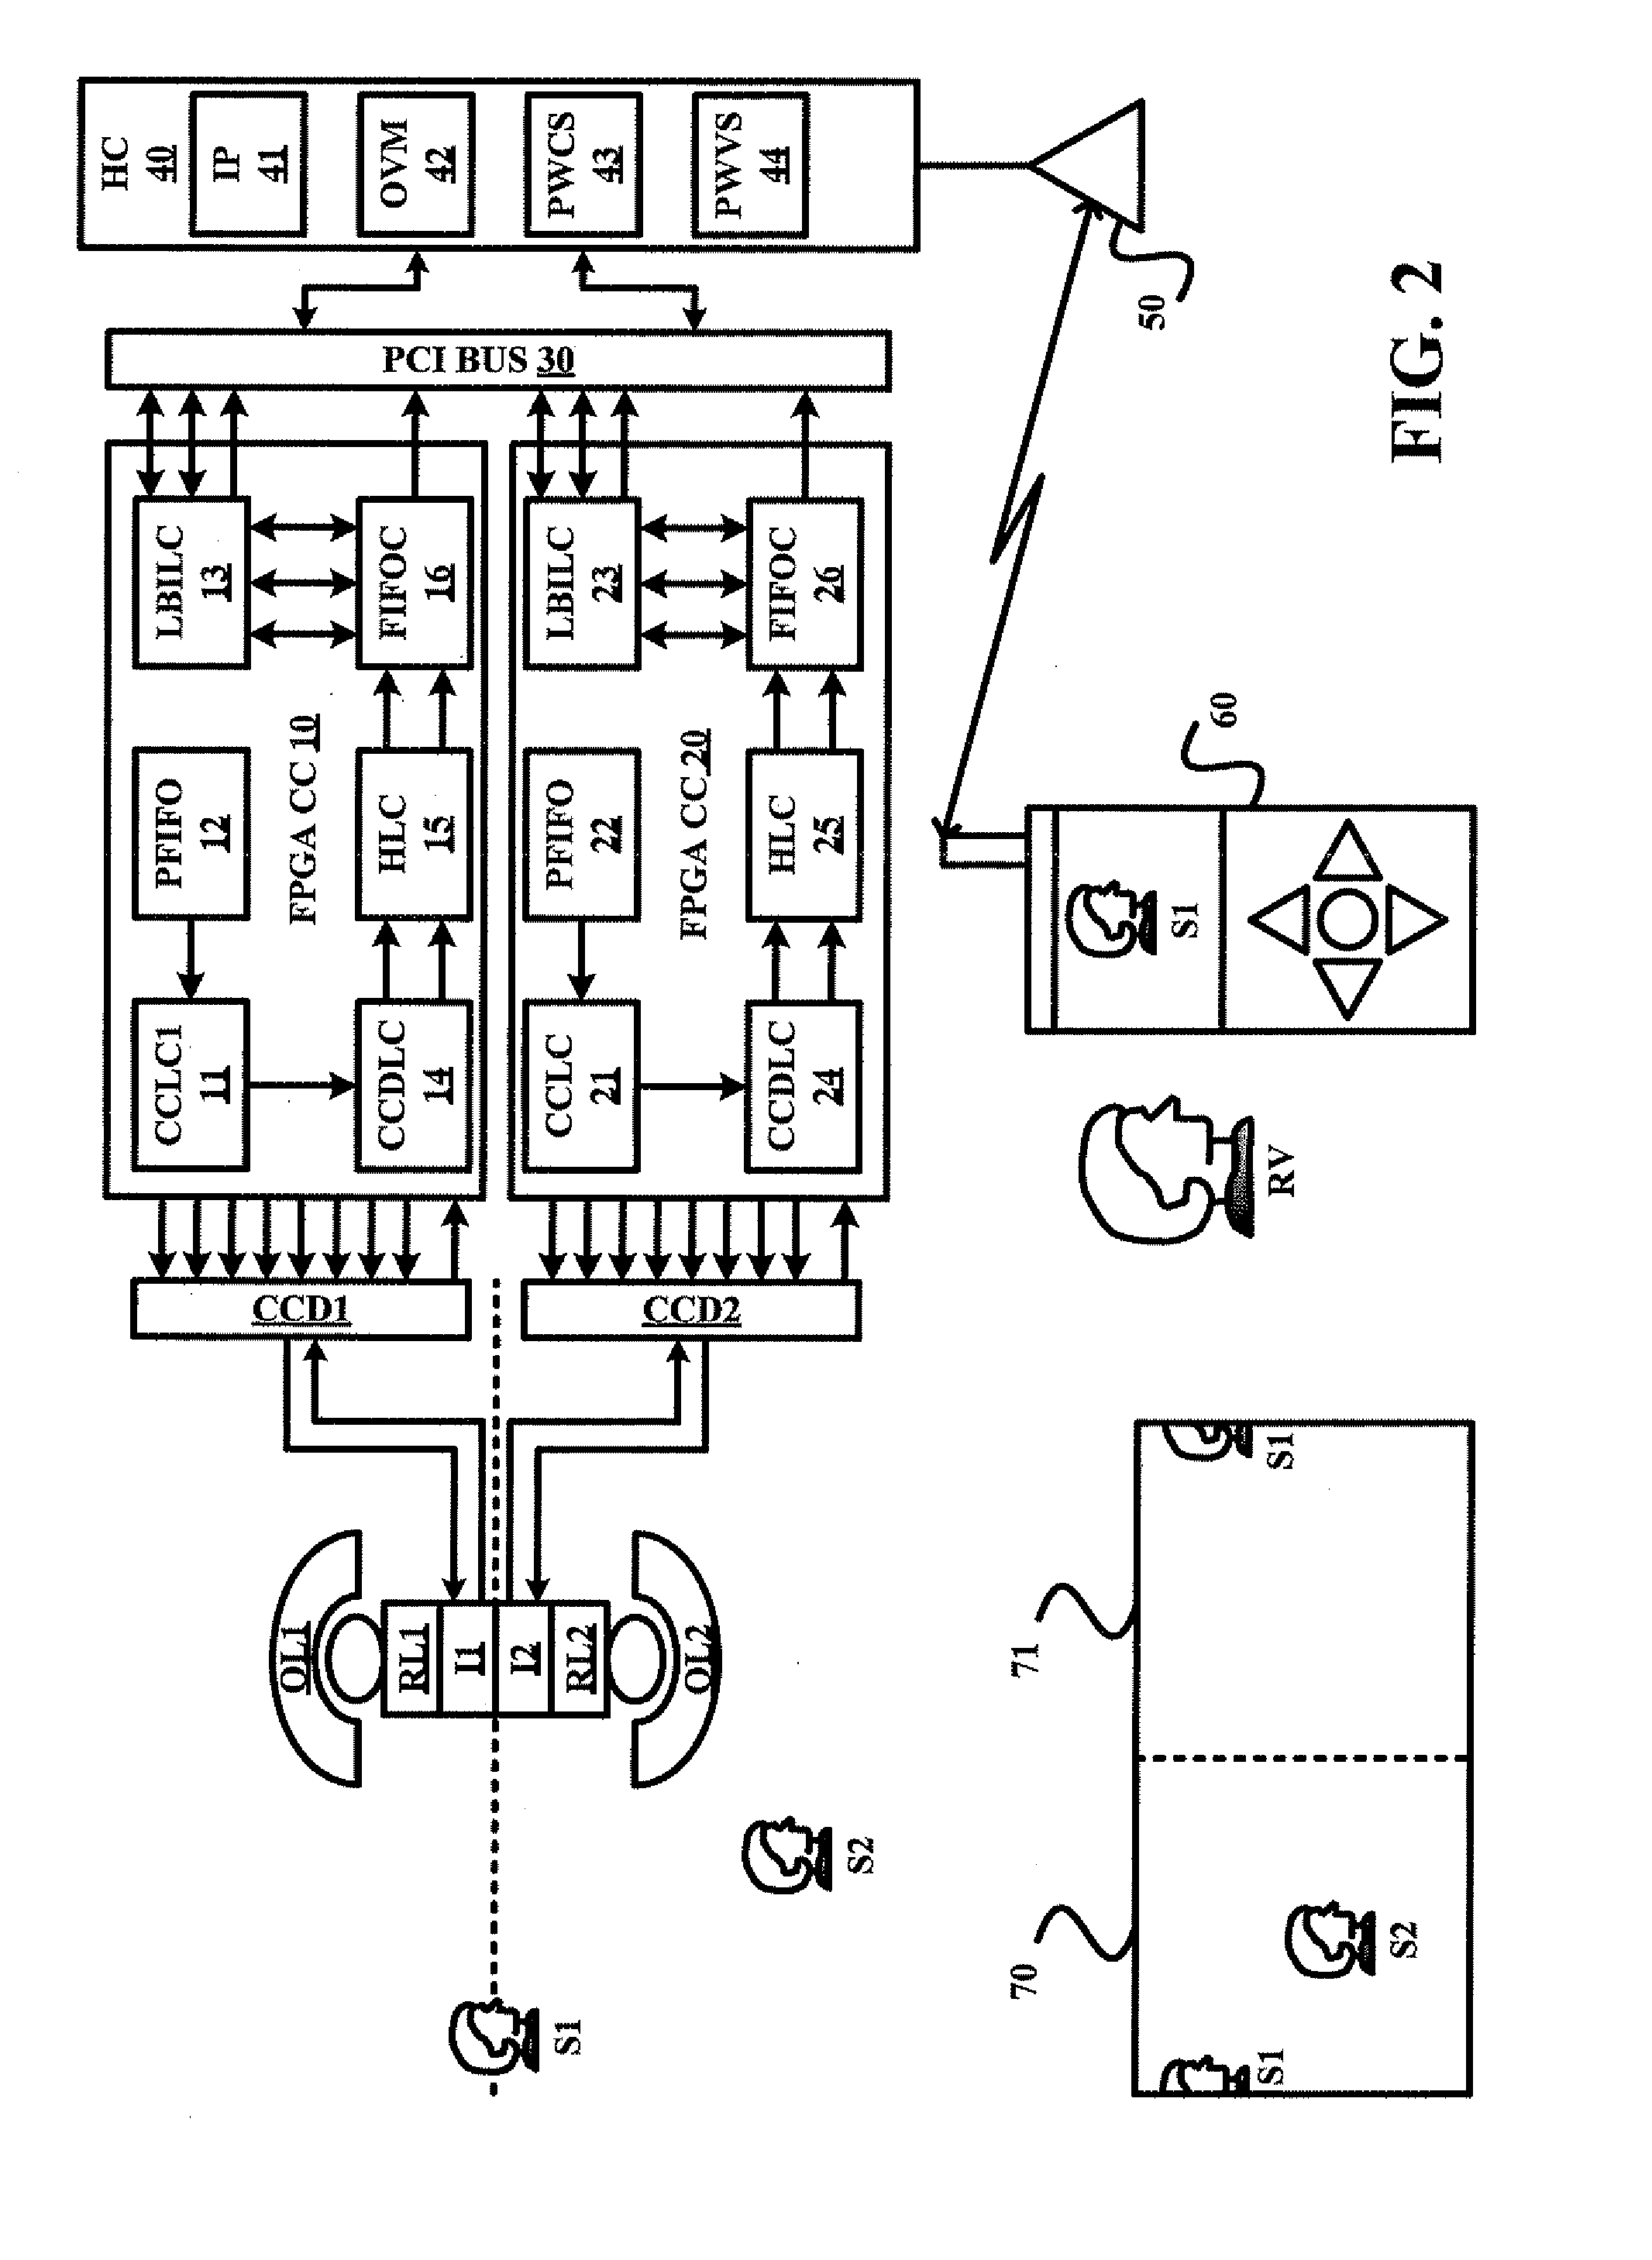 Dynamic interactive region-of-interest panoramic/three-dimensional immersive communication system and method